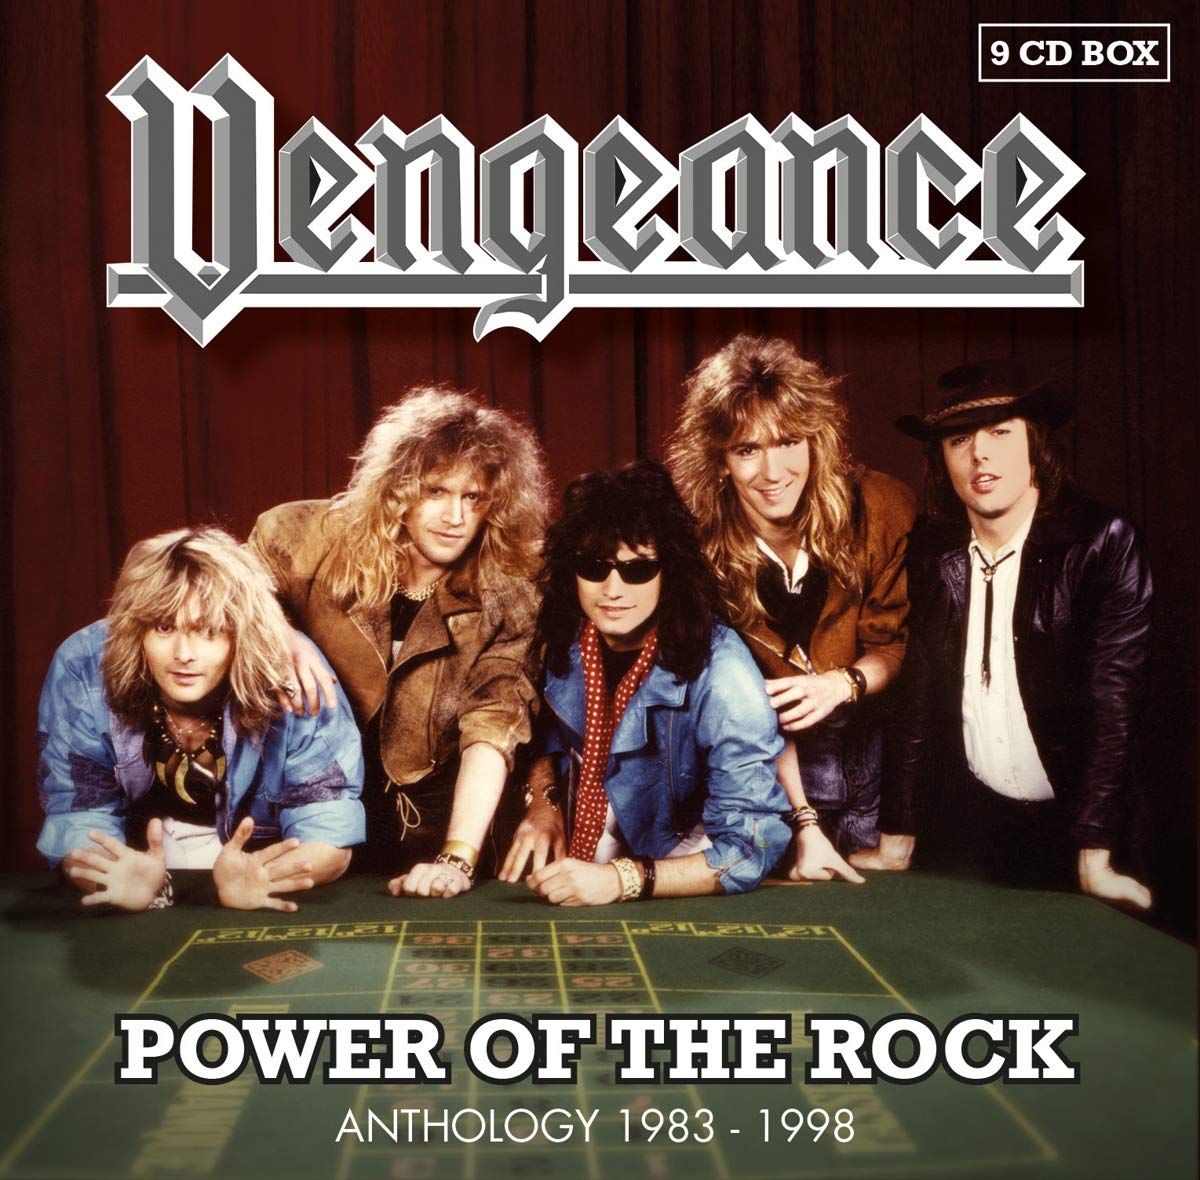 Vengeance-Power Of The Rock Anthology 1983-1998-(CDP-1139)-REMASTERED LIMITED EDITION BOXSET-9CD-FLAC-2019-WRE